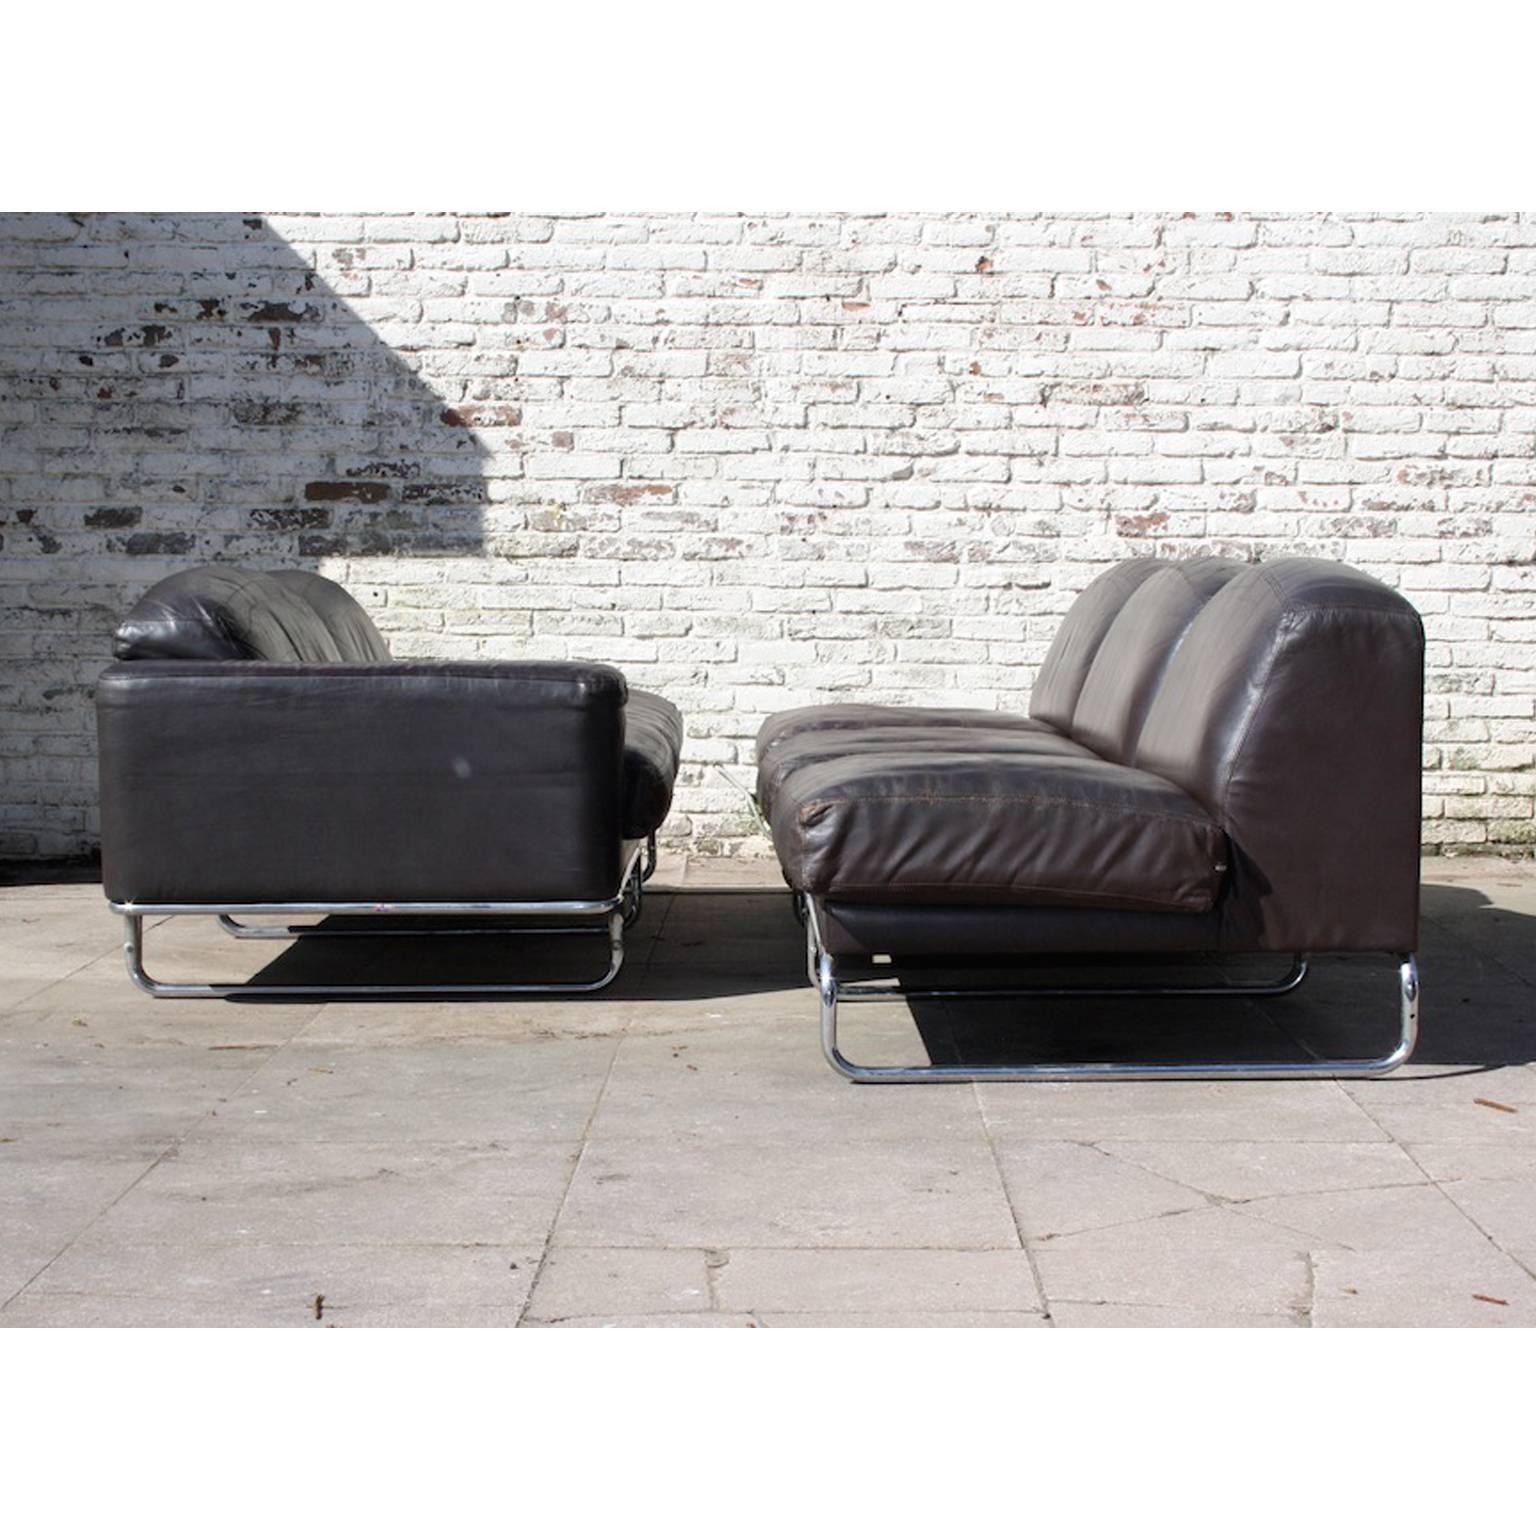 Late 20th Century Vintage Leather and Steel Modular Sofa by Topform, Dutch Design, 1970s